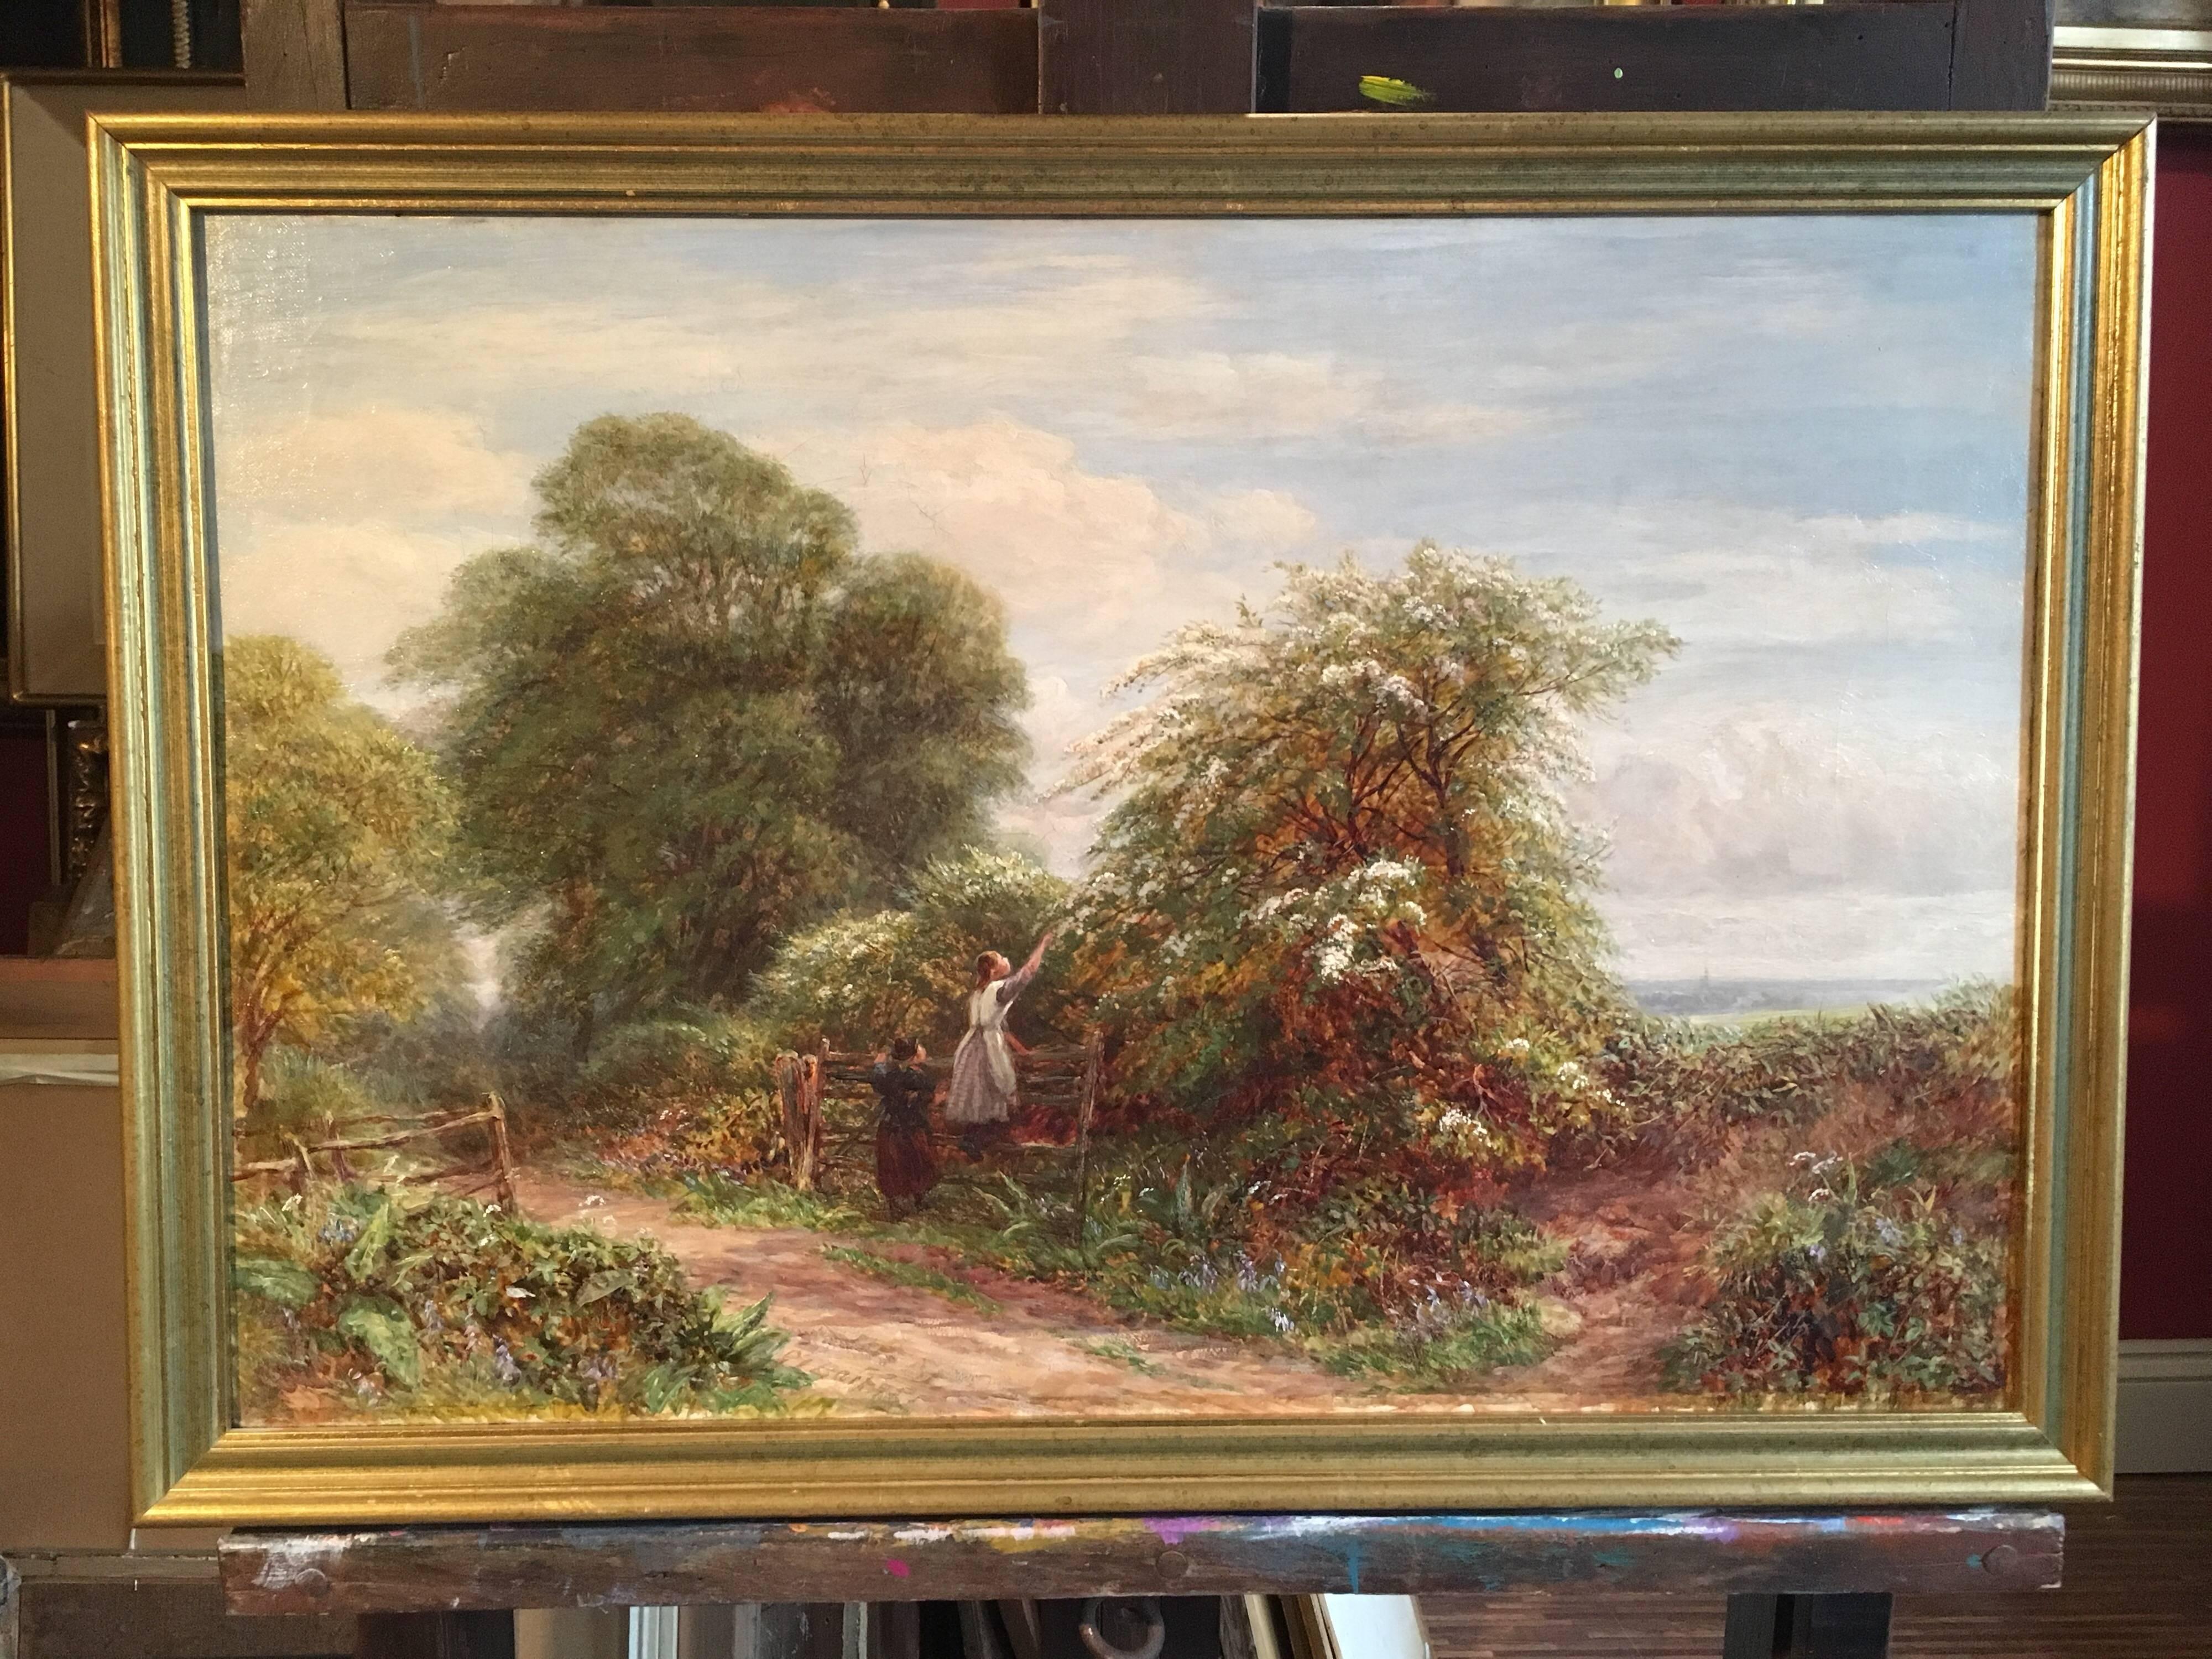 Gathering Berries, Victorian Oil Painting, Signed - Beige Landscape Painting by Unknown